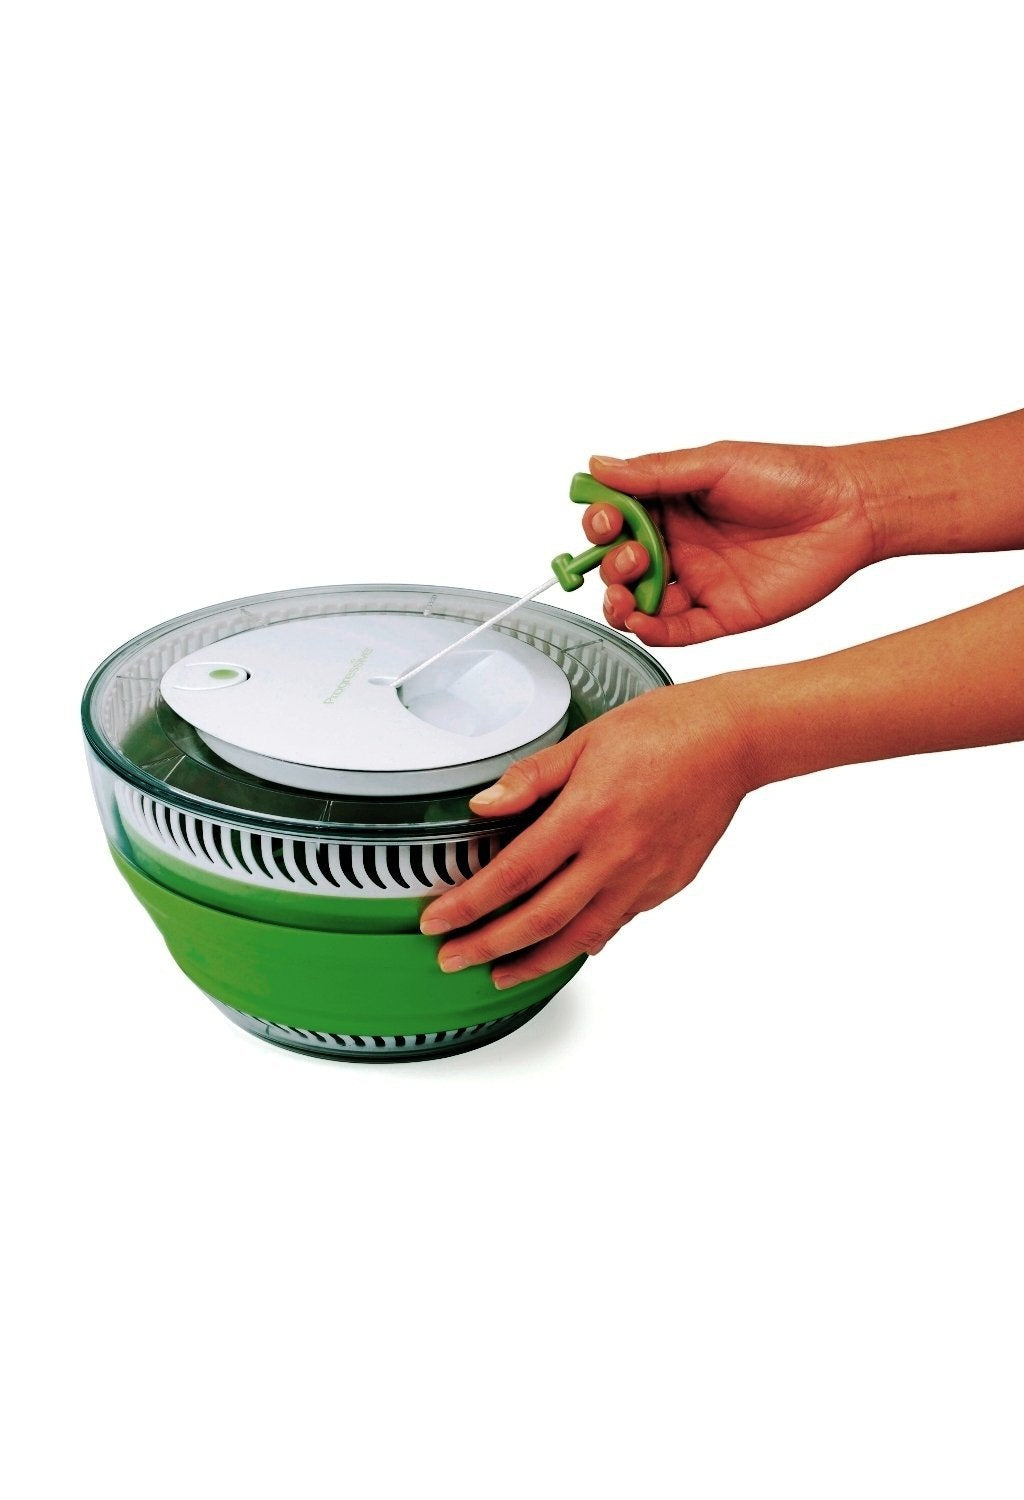 buy salad & herbs tools & gadgets at cheap rate in bulk. wholesale & retail kitchen gadgets & accessories store.